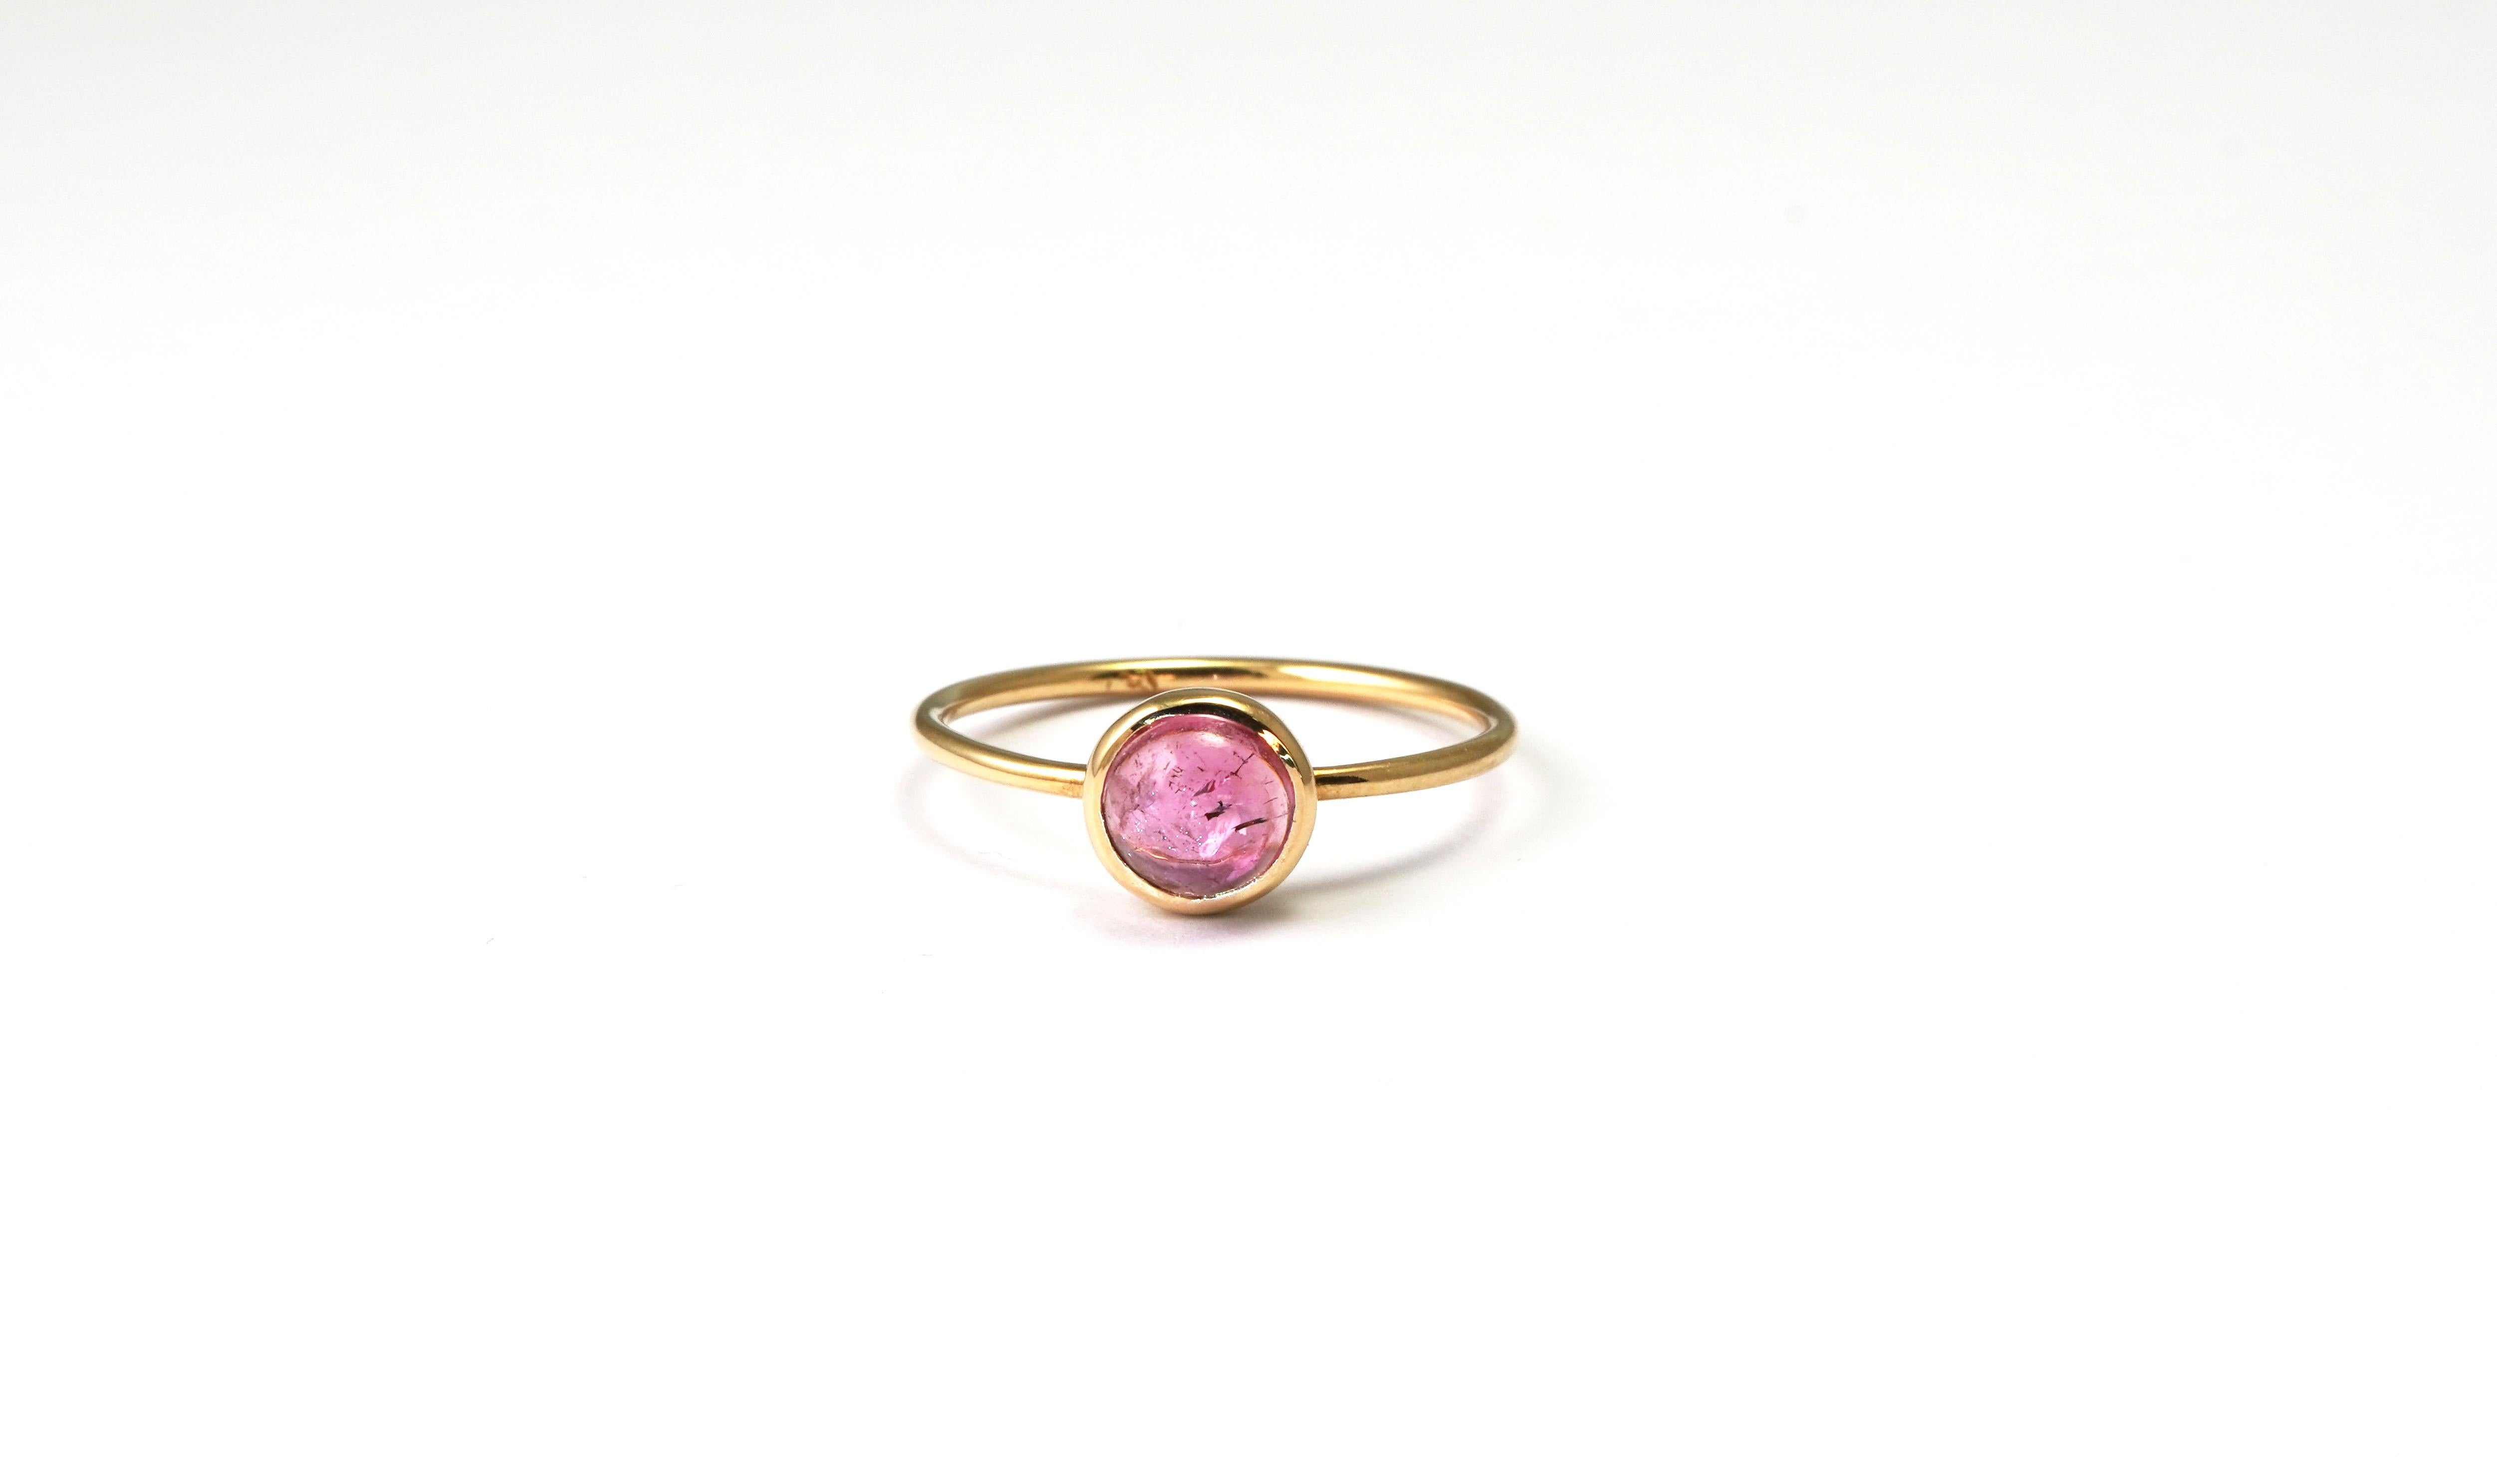 14 kt Gold ring with Tourmaline Rubellite
Gold color: Yellow
Ring size: 6 US
Total weight: 1.24 grams

Set with:
- Tourmaline Rubellite
Cut: Cabochon
Weight: 1.06 ct
Color: Rose